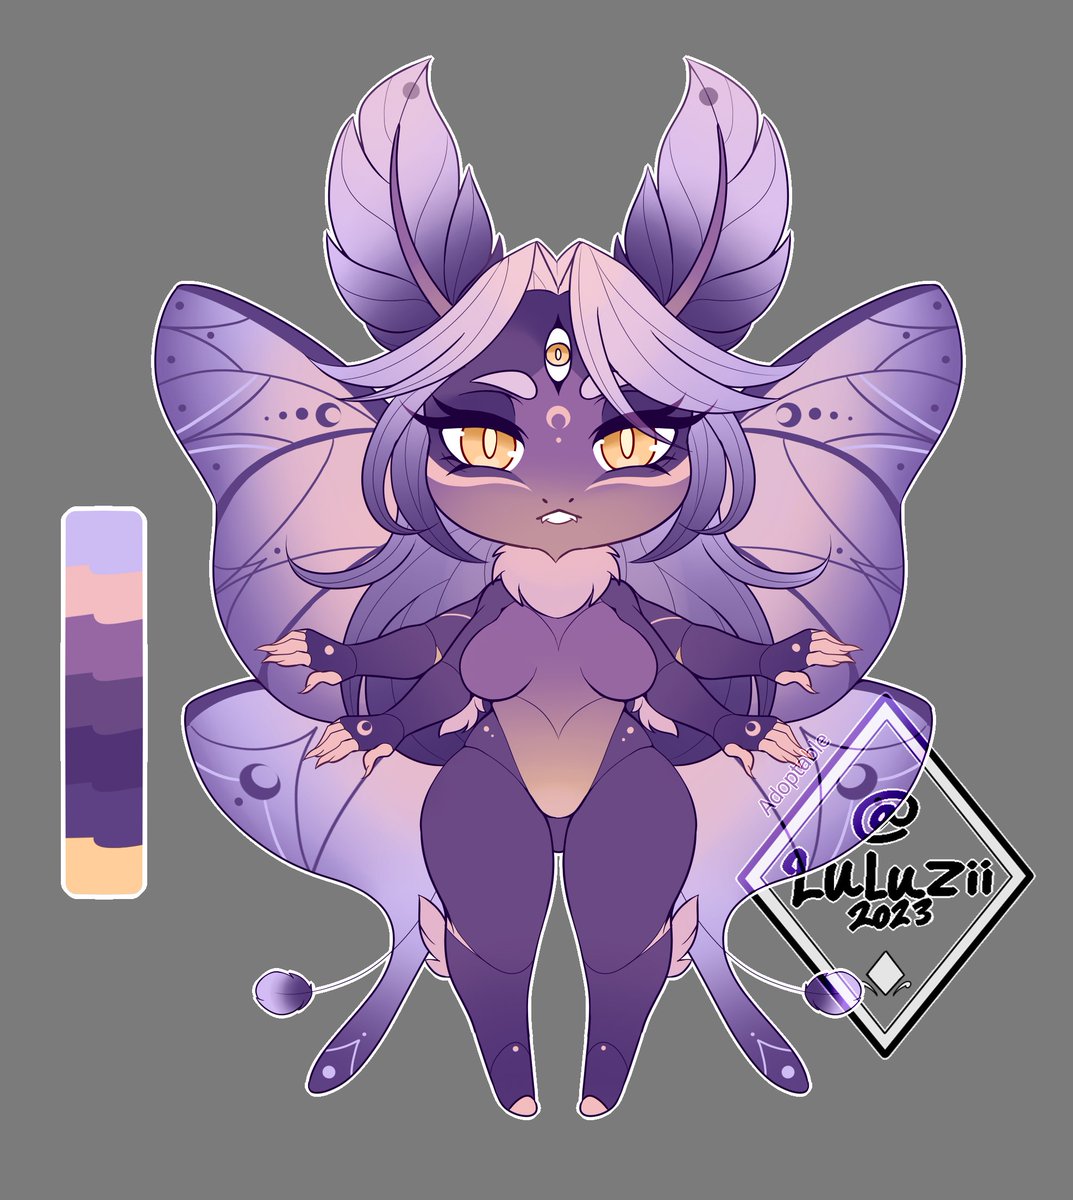 Moth adopt 🌙
See comments for more info 

#adoptables